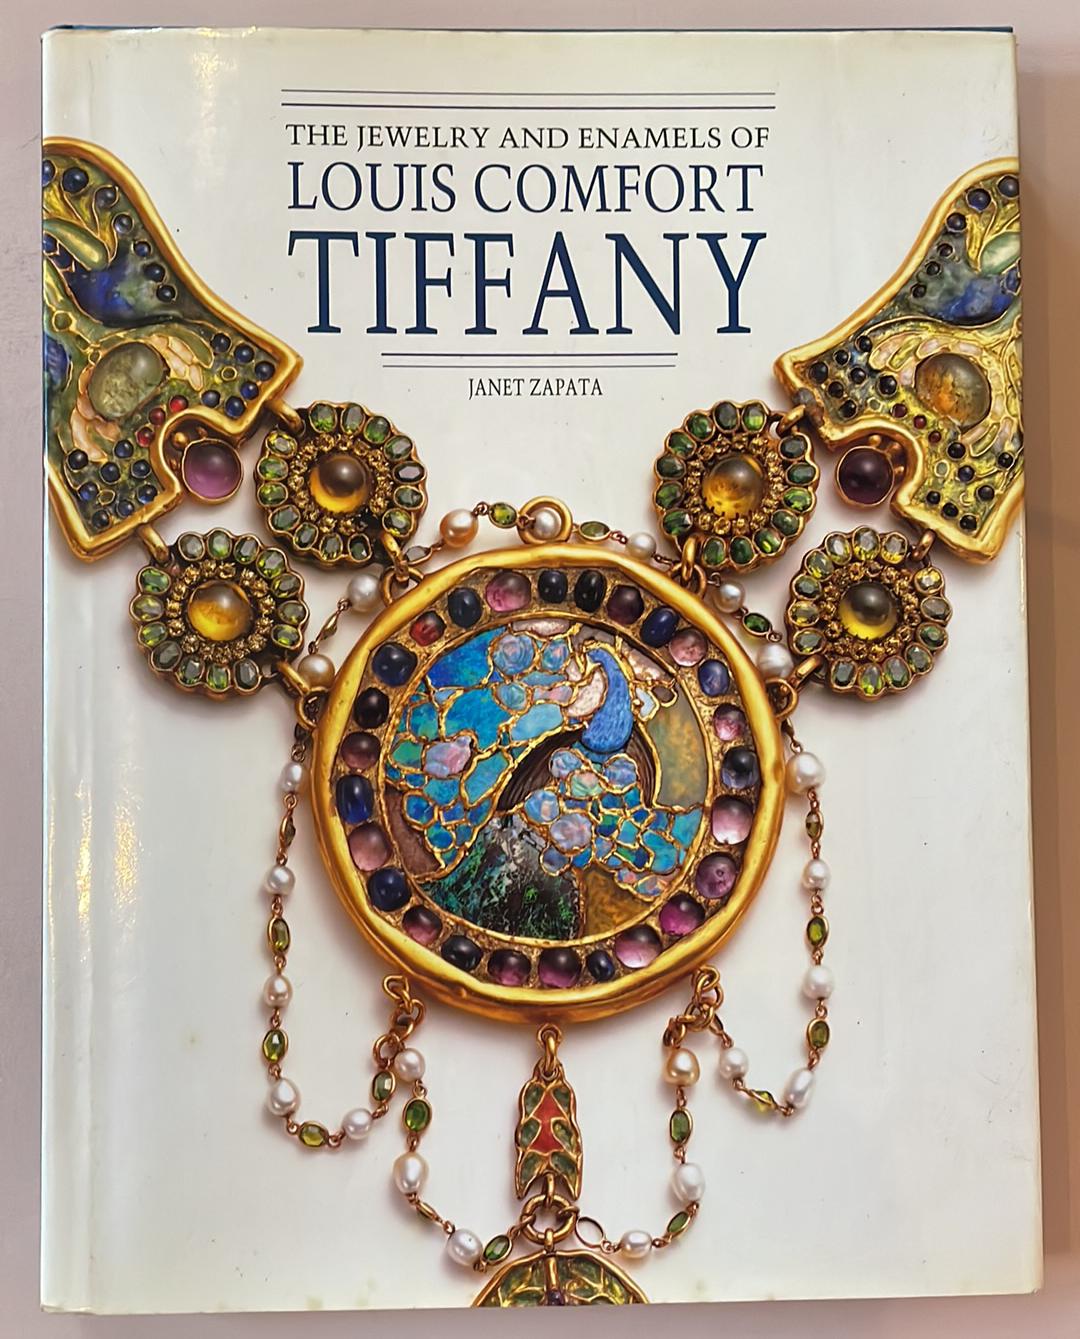 The Jewelry and Enamels of Louis Comfort Tiffany. With 142 Illustrations,  84 in Colour by Janet Zapata: Near Fine Hardcover (1993)